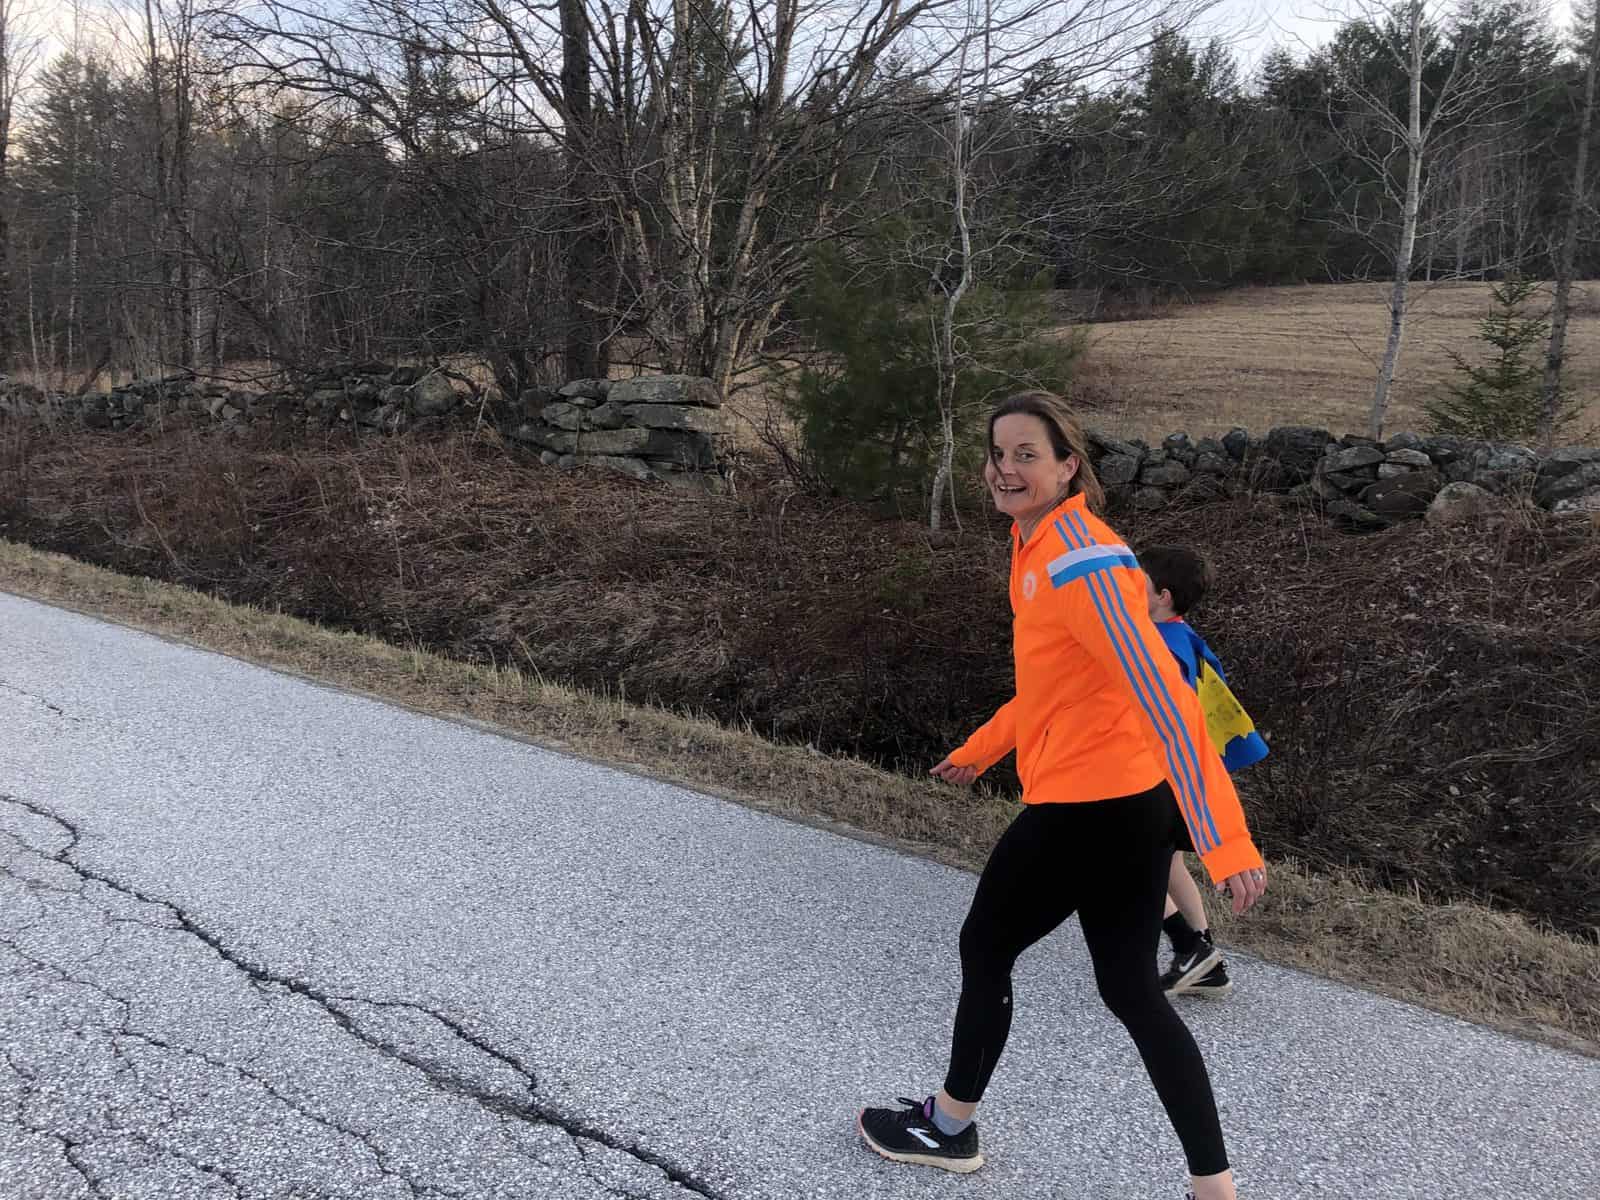 After the cancellation of the Boston Marathon, Lisa Marks committed to a local 26.6-mile run in support of the Dana Farber Cancer Institute.